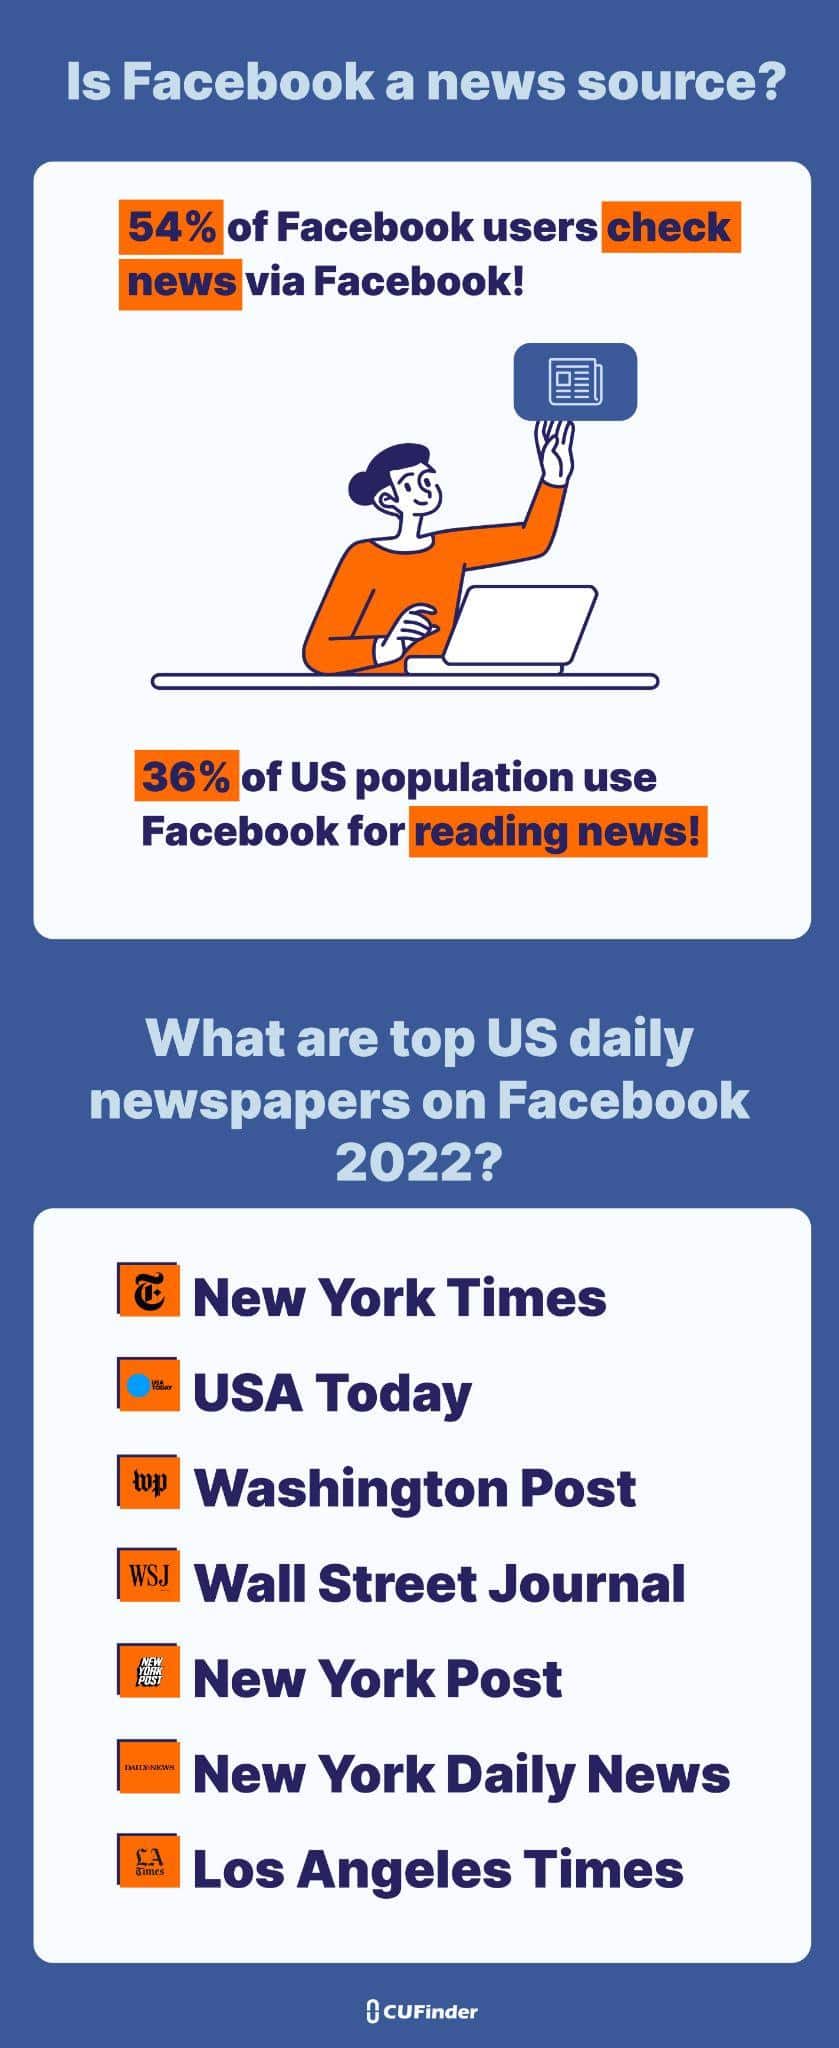 The Whooping Facebook Marketing Statistics for 2023!
The worthwhile and undeniable influence of Facebook platform in companies’ prospecting, sales, and revenue led us to gather the updated Facebook Marketing statistics 2022 in this article. To make a sound choice and create a targeted marketing plan for 2023, these Facebook Marketing stats are absolutely necessary to know.
First of all what is Facebook Marketing?
Briefly, using Facebook Social Platform as a digital marketing tool to generate more qualified leads, improve Return on Investment (ROI), sales, profit, & company website traffic, build trust & brand awareness, and reduce marketing costs is known as Facebook marketing.
What does a Facebook Marketer do?
The Facebook marketer is the specialist responsible for Facebook’s project planning, explaining the project to content producers & designers, contact tracking, maintaining Facebook profiles, creating reports, managing ad spending, replying to Facebook comments, and many other tasks.
Let's commence reading the Facebook Marketing stats for 2022.
In 2023, leave Social Media marketing stress behind by focusing on updated Facebook marketing strategies!

Facebook Marketing Stats for 2023

1. Facebook and Meta's relationship
First of all, before getting to the point, let’s talk about Facebook and Meta relationships!
The Facebook company was rebranded as Meta on 28 October 2021. Now Meta Company owns 2 Social Networks, including Facebook & Instagram and one messenger, WhatsApp.
Mark Zuckerberg, the CEO of Meta said that the new name “reflects the full breadth of what we do and the future we want to help build”.
In this article, we are going to talk about the statistics of Facebook Social Network as one of the apps provided by Meta.

2. Facebook overview

3. What are the top 3 social media in the world 2022?
Facebook is the first and the most-used Social Media in 2022 followed by YouTube and Instagram.
You can see the monthly active users of Facebook in the picture below.
Two of Meta Company’s apps, Facebook & Instagram, are among the first 3 most-used Networking Channels of the world. Outstanding!

4. What is the best social media for marketing?
Facebook is the king and the primary Social Media for marketing and business expanding in 2022.
Still we see the name of Facebook as the first mentioned Social Channel used by marketers worldwide and it’s very unlikely that Facebook will lose this position in 2023!

5. What is the total number of Facebook users worldwide 2022?
As of Q3 2022, Facebook's monthly active users (MAUs) were 2.96 billion.
And at the same time, the number of people who use Facebook each day was 1.968 billion.
Considering around 4.59 billion Social Media users in 2022 from all over the world, almost 2 out of every 3 Social Media users are active on Facebook!

6. Facebook monthly active users (MAUs) bumper growth from 2008 to 2022
As you can see in the chart below, Facebook active monthly users (MAUs) increased continuously in recent years, starting from 100 million in 2008 and ending at 2960 million in 2022!

7. How many businesses have a Facebook page 2022?
Over 200 million small businesses from all corners of the world benefit from Facebook in 2022.

8. Facebook revenue by year from 2010 to 2021
Facebook revenue was US $ 1.97 billion in 2010 which increased to US $ 117.92 billion in 2021. This uninterrupted growth caused Facebook to remain the widely-used Social Channel among all people and digital marketers of the world.

9. Annual revenue of Facebook by region from 2015 to 2021 (in billion)
The diagram below shows that US & Canada had the highest annual revenue of Facebook from 2015 to 2021. Europe and Asia Pacific were respectively after the US & Canada.

10. Which country uses FB the most?
India is the first country with the most number of Facebook users, equal to 416.6 million. It is nearly 30% of the total population of India.
After that, the USA, Indonesia, Brazil, Philippines, Mexico, Vietnam, Thailand, and Japan are respectively placed in 2nd to 9th place.
If we ignore India, the USA is the only country with over 200 million Facebook users. Indonesia and Brazil are the only 2 countries that have between 100M to 200M Facebook users.
Then, each of these countries; Philippines, Mexico, Vietnam, Thailand, and Japan have between 50M to 100M Facebook users. And afterwards all other countries of the world have less than 50M Facebook users.
However, you can see the exact number of Facebook users of the first 10 countries in the diagram below.

11. How many people use Facebook in the UK 2022?
Around 44.84M of the UK total population used Facebook actively in 2022. This is equal to 66% of the whole population of the UK which is estimated to be 67.9M.

12. What country has the world's lowest population of Facebook users?!
Tokelau with around 400 Facebook users is the country with the lowest population of Facebook users!
Vatican City and Niue are after that. Each of them has less than 100 Facebook users!

13. Facebook age demographics worldwide 2022
Users who are between 25-34 years old use Facebook more than other age groups followed by the 18-24 year old group.
As people get older than 35 years; their use of Facebook decreases every year.

14. Facebook gender demographic worldwide 2022
54% & 46% of Facebook users are respectively female and male.
Generally, men are more addicted to Social Media but for Facebook, the story is different!

15. US Facebook users by age & gender as of September 2022
As you can see below, in all age groups except the group of 25- 34 years old users, the numbers of US female Facebook users are more than male as of September 2022.
In the 25-34 group, the number of male and female US users were equal.
Furthermore, the 25-34 age group has the most number of Facebook users in the US followed by 18- 24 years old users. However, there is a slight difference between the number of groups 18- 24 and the group 35- 44.
Obviously, the lowest numbers of US Facebook users in 2022 are related to the group of 13-17 years’ old children; in this group, girls are more than boys.
The difference between the last two groups, 55-64 and +65 is also a little inconsequential.

16. What is the fastest-growing age group on Facebook in US?
Pew Research Center found that the number of Facebook users who were over 65 years old increased significantly from 26% in 2018 to 40% in 2019.
Take into consideration to create posts for this age group upwards!

17. Which social media platform is the most used for advertising worldwide?
Social Media marketers benefit from Facebook ads more than other Social Networks.
In-detail, 93% of them use Facebook ads!

18. What social media is most used for advertising in the US?
According to Statista, 66% of US small businesses (SMEs) used Facebook for advertising. Afterwards, the most-used Social Media in the US for advertising were respectively YouTube, Instagram, Snapchat, and TikTok.

19. What is the average cost per click on Facebook ads?
According to WordStream, the average CPC (cost per click) is US $ 1.72 across all industries.
However, finance and insurance industry has the highest CPC: US $ 3.77
And apparel has the lowest CPC: US $ 0.45

20. How many app downloads does Facebook have from 2017 to 2021?
Facebook app annual download jumped from 660 million in 2017 to 710 million in 2018. Afterwards, it experienced a decline from 2018 to 2021. Finally in 2021, it became 416 million; less than 660 million in 2017.

21. How long is the average user on Facebook app 2022?
Surveys showed that in Q1 2022, a typical user spent an average of 19.4 hours on Facebook per month.
While in Q2 2022, it increased to 19.7 hours!

22. How many Facebook users are on mobile & how many on desktop?
98.3% of users sign in to Facebook through their smartphones while 1.7% of them use laptops or PCs.
Not bad to mention that around 10 years ago, in 2012, Zuckerberg declared “now we really are a mobile company”!
98.3% of Facebook users sign in via mobile!
Only 1.7% via PC or laptop!

23. What percentage of mobile Facebook users use Android phone?
Around 80% of mobile Facebook users use Android!

24. Facebook pages by content type in 2021
In 2021, most of Facebook content type was image followed by video, link, and status.

25. What type of content gets the most engagement on Facebook?
Video!
Though the most published content on Facebook is image, the highest engagement rate is for video.
Video, photo, and status boast respectively 6.04%, 4.36%, and 1.66% engagement rate on Facebook.

26. Will Facebook delete fake accounts?
The diagram below shows that Facebook every month removes billions of fake accounts!
From the first quarter of 2018 to the third quarter of the same year, less than 1 billion fake accounts were distinguished and removed by Facebook every quarter.
From Q4 2018 to Q1 2022, every quarter, between 1.1 billion to 1.8 billion fake accounts were detached, except in Q1 2019 when 2.2 billion of fake accounts were omitted by Facebook!

27. How many reports does it take to delete a fake Facebook account? How long does a Facebook report take to be checked by Facebook’s support team?
Usually in 48 hours, your report is checked by a member of the Facebook support team.
However there is no strict rule!
It also depends on some factors like the case’s seriousness, the validity and history of the account that has sent the report, and the number of accounts that report a certain page.
Based on these factors, an account may be deleted in 24 hours just by one report and sometimes it takes more time to remove an account reported by many people.

28. How many Facebook users use Groups 2022?
Facebook Groups are used approximately by 1.8 billion people every month.

29. Who has the most followers on Facebook 2022?

The top 5 most followed on Facebook 2022 are mentioned respectively below:
@Facebook: the page of Facebook Internet Services created in 2007 with 182M followers in 2022.

@cristiano: the page of Cristiano Ronaldo – famous football player - created in 2009 with 150M followers in 2022.

@MrBean: the page of Mr. Bean – famous comedian – created in 2008 with 132M followers in 2022.

@ChinaGlobalTVNetwork: the page of CGTN – Chinese TV Network – created in 2016 with 119M followers in 2022.

@SamsungGlobal: the page of Samsung Electronics Company created in 2009 with 47M followers in 2022.

30. Is Facebook a news source? What percentages of people use Facebook as a news source?
As mentioned on Journalism, around 54% of all Facebook users check news via Facebook.
Furthermore, approximately 36% of Americans use Facebook as a news source.
The New York Times, USA Today, The Washington Post, The Wall Street Journal, New York Post, New York Daily News, and Los Angeles Times are some of the top US daily newspapers on Facebook.

31. How many people sign up to Facebook per minute?
The total number of people signed up to Facebook in 2021 per minute, hour, day, and week are as follow:
Every minute: 400 users
Every hour: 24,000
Every day: 576,000
Every week: 4,032,000

32. How many people post on Facebook per minute?
In 2021, 136,000 posts were published on Facebook per minute!

33. How many comments are posted on Facebook every minute?
Over 510,000 comments were made on Facebook’s posts per minute in 2021!
34. How many likes do Facebook users generate every minute?
Astonishing to know that Facebook users generated 4 million likes per minute in 2021!
35. How many statuses are updated on Facebook per minute?
In 2021, around 293,000 statuses were updated per minute.
36. What is Facebook monetization?
Professional/business Facebook profiles that are older than 30 days and have at least 10,000 followers can earn money from the invaluable content they share on Facebook.

37. What are the peak times for Facebook?
On Wednesday and Thursday, from 11 am to 2 pm, the highest traffic occurs on Facebook. Hence, that would be great if you post at that time period to reach more audience, likes, comments, and shares.